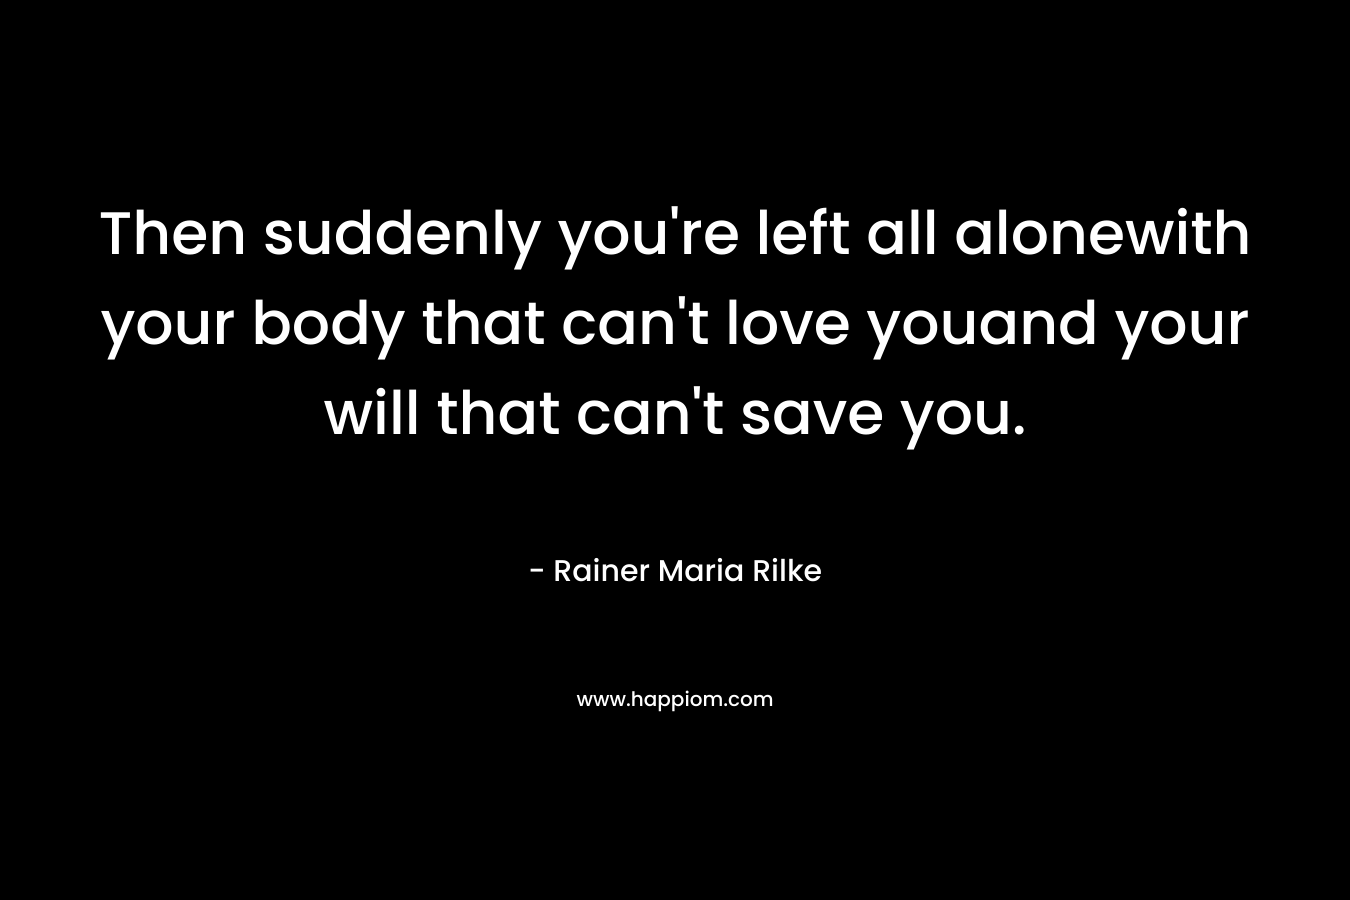 Then suddenly you're left all alonewith your body that can't love youand your will that can't save you.